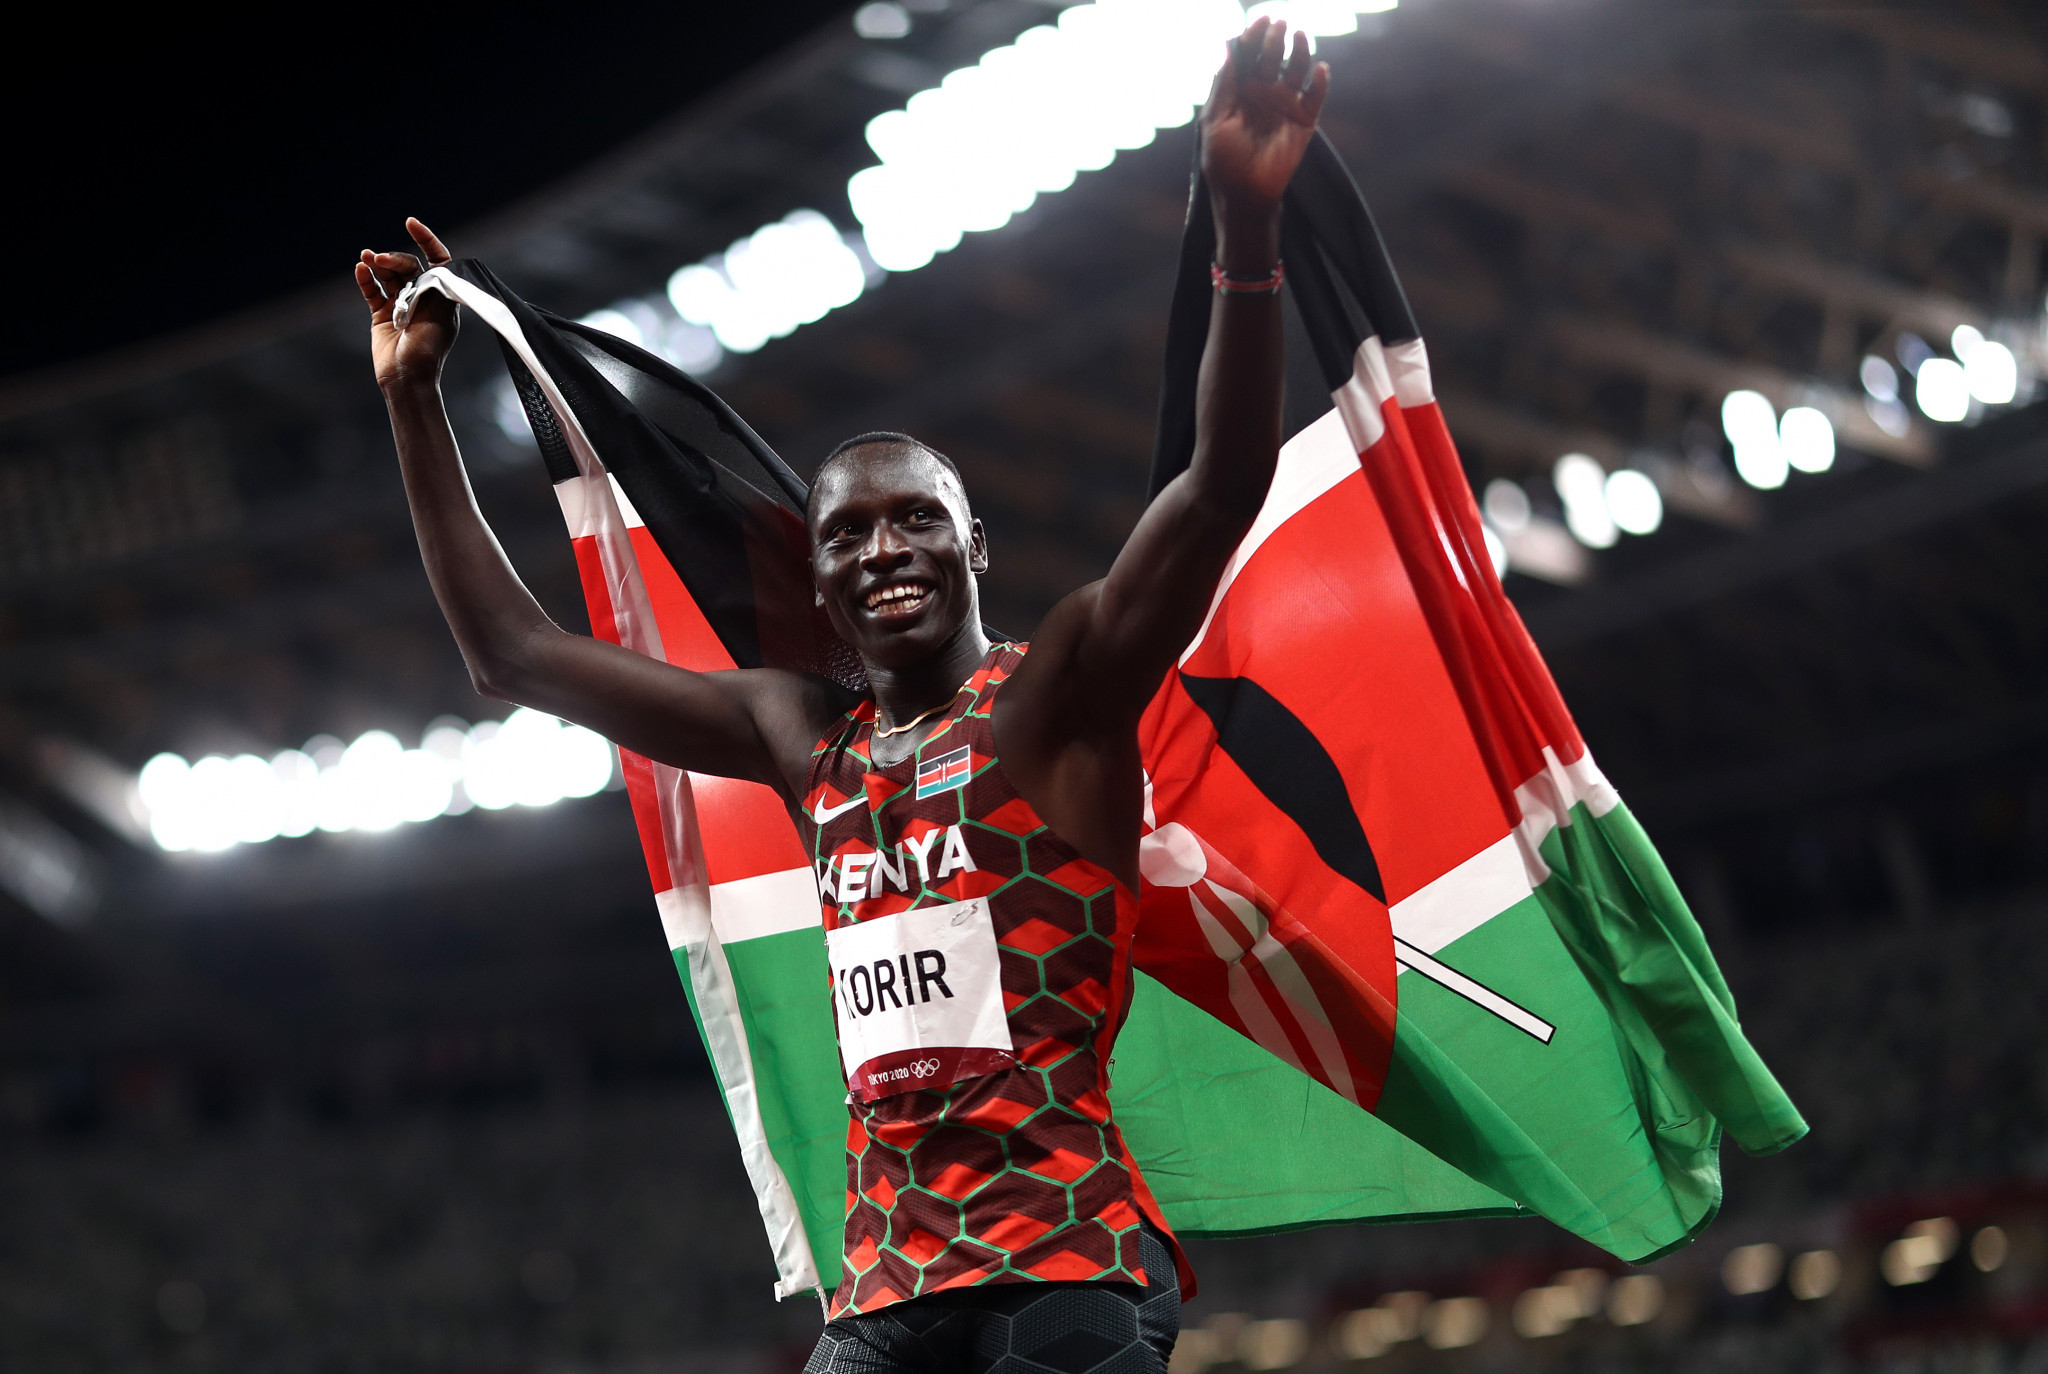 Emmanuel Korir has been selected to compete for Kenya at Birmingham 2022 ©Getty Images